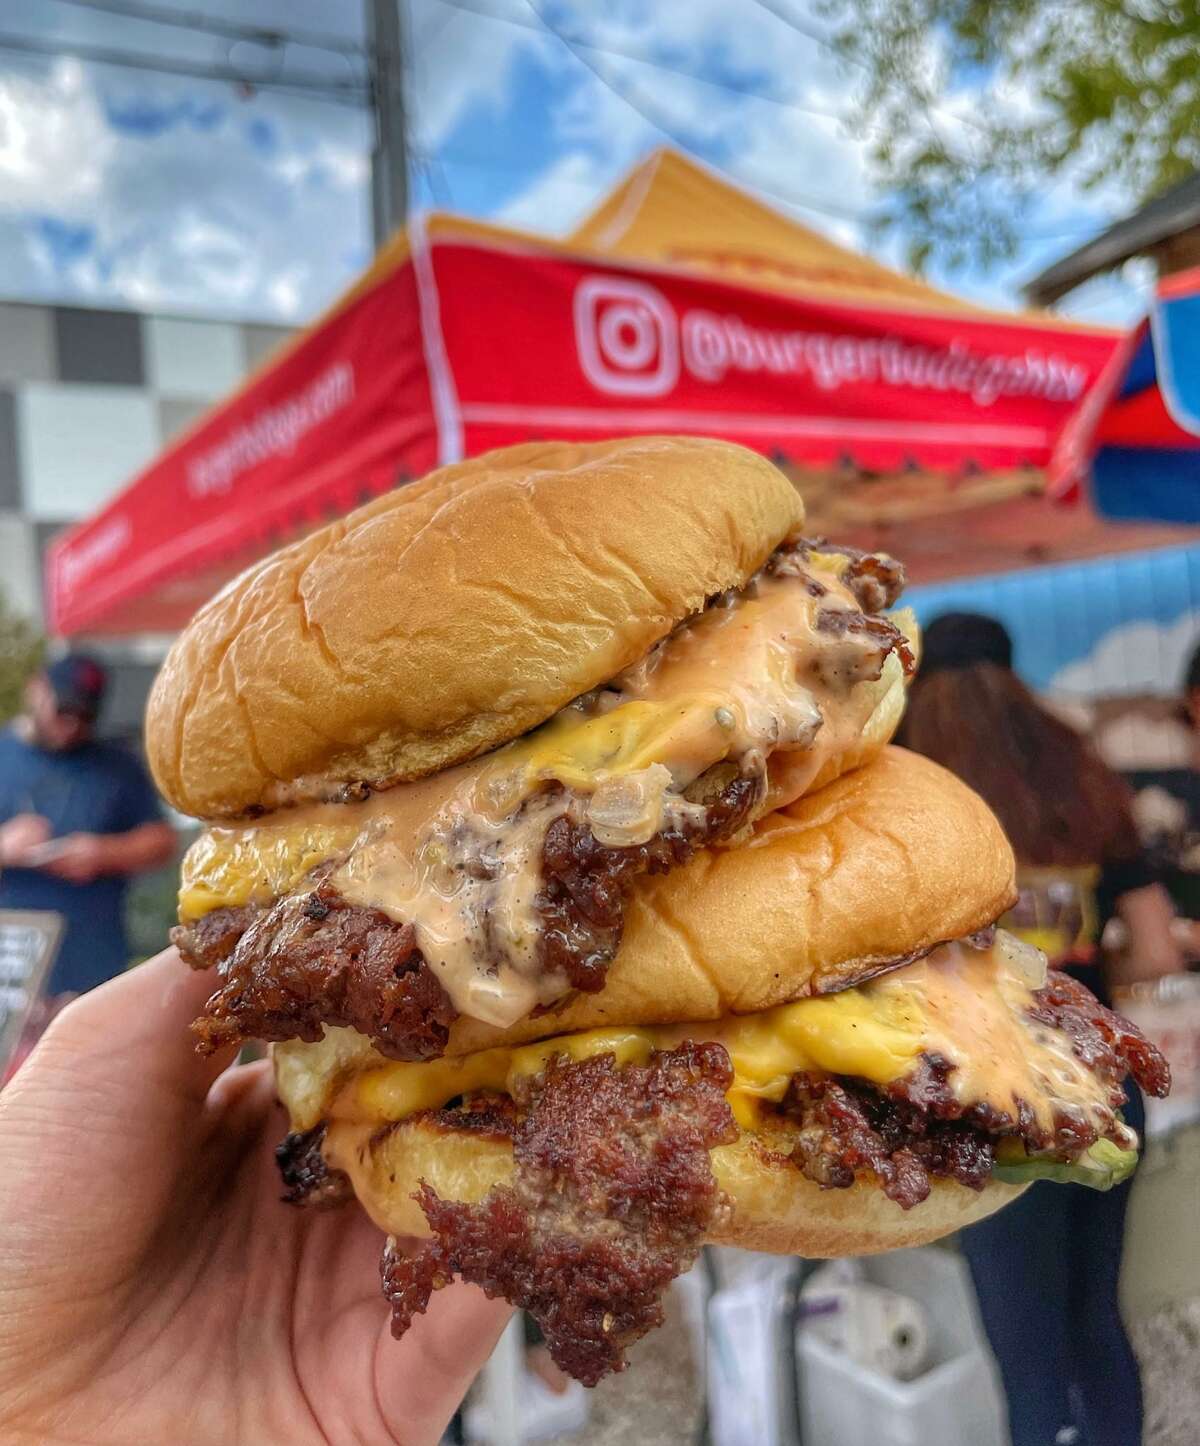 Burger Bodega is a new smash burger pop-up concept from Abbas Dhanani specializing in a double-patty burger with American cheese, grilled onions, pickles and bodega sauce.